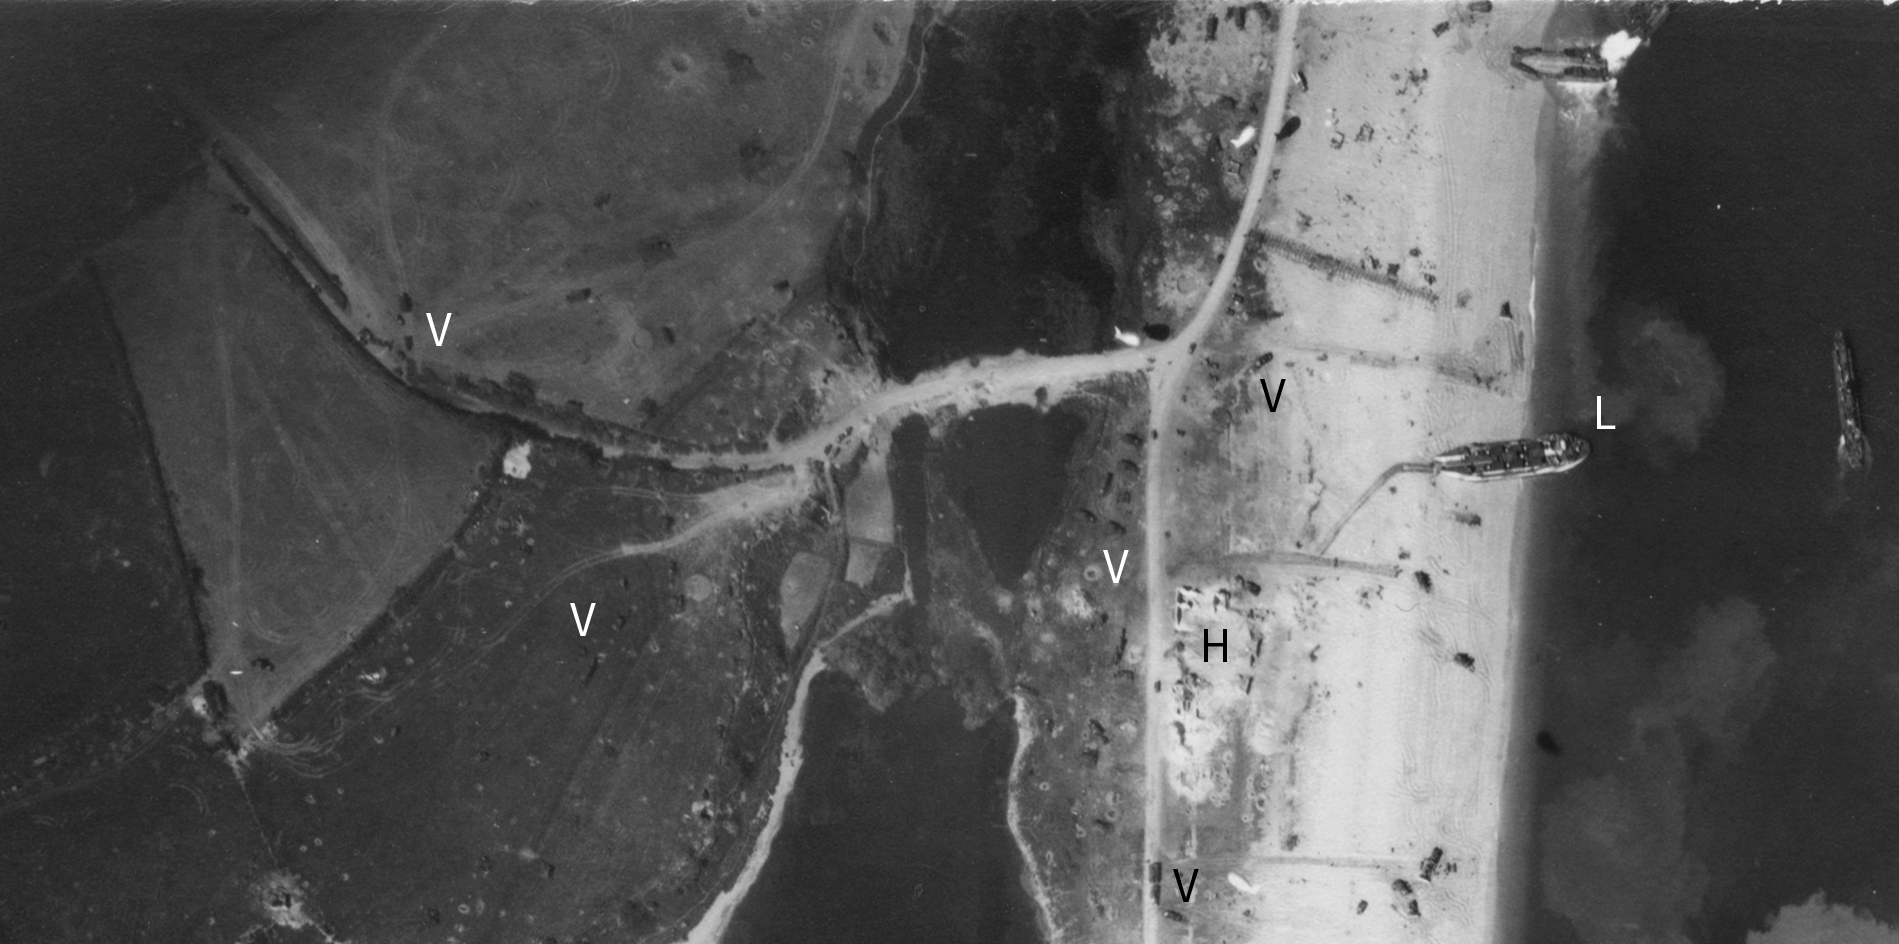 Detail from a black and white vertical aerial photograph, showing a narrow strip of beach between an inland pool of water and the sea. Towards the centre-top of the image is a bridge spanning a narrow section of the pool of water. A beachside road crosses the bridge and continues inland. Two large landing craft are stationary at the edge of the beach. Tracks lead from them. Other vehicles are on the beach. Barrage balloons float above the landing area. The letters 'L', 'H' and 'V' applied to the image mark locations.